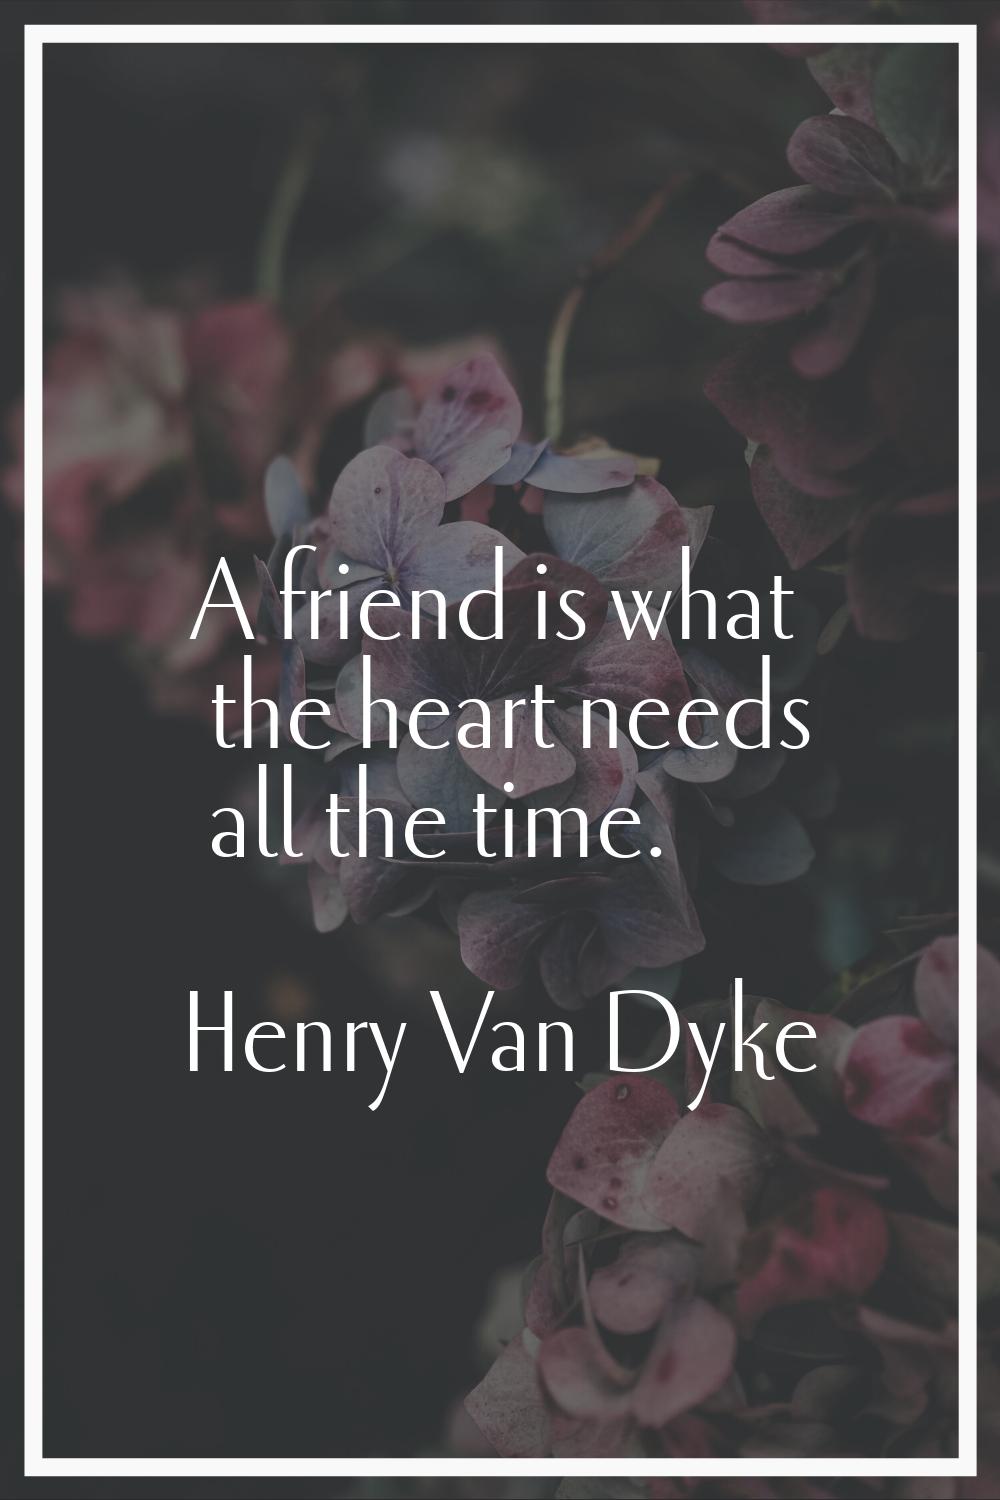 A friend is what the heart needs all the time.